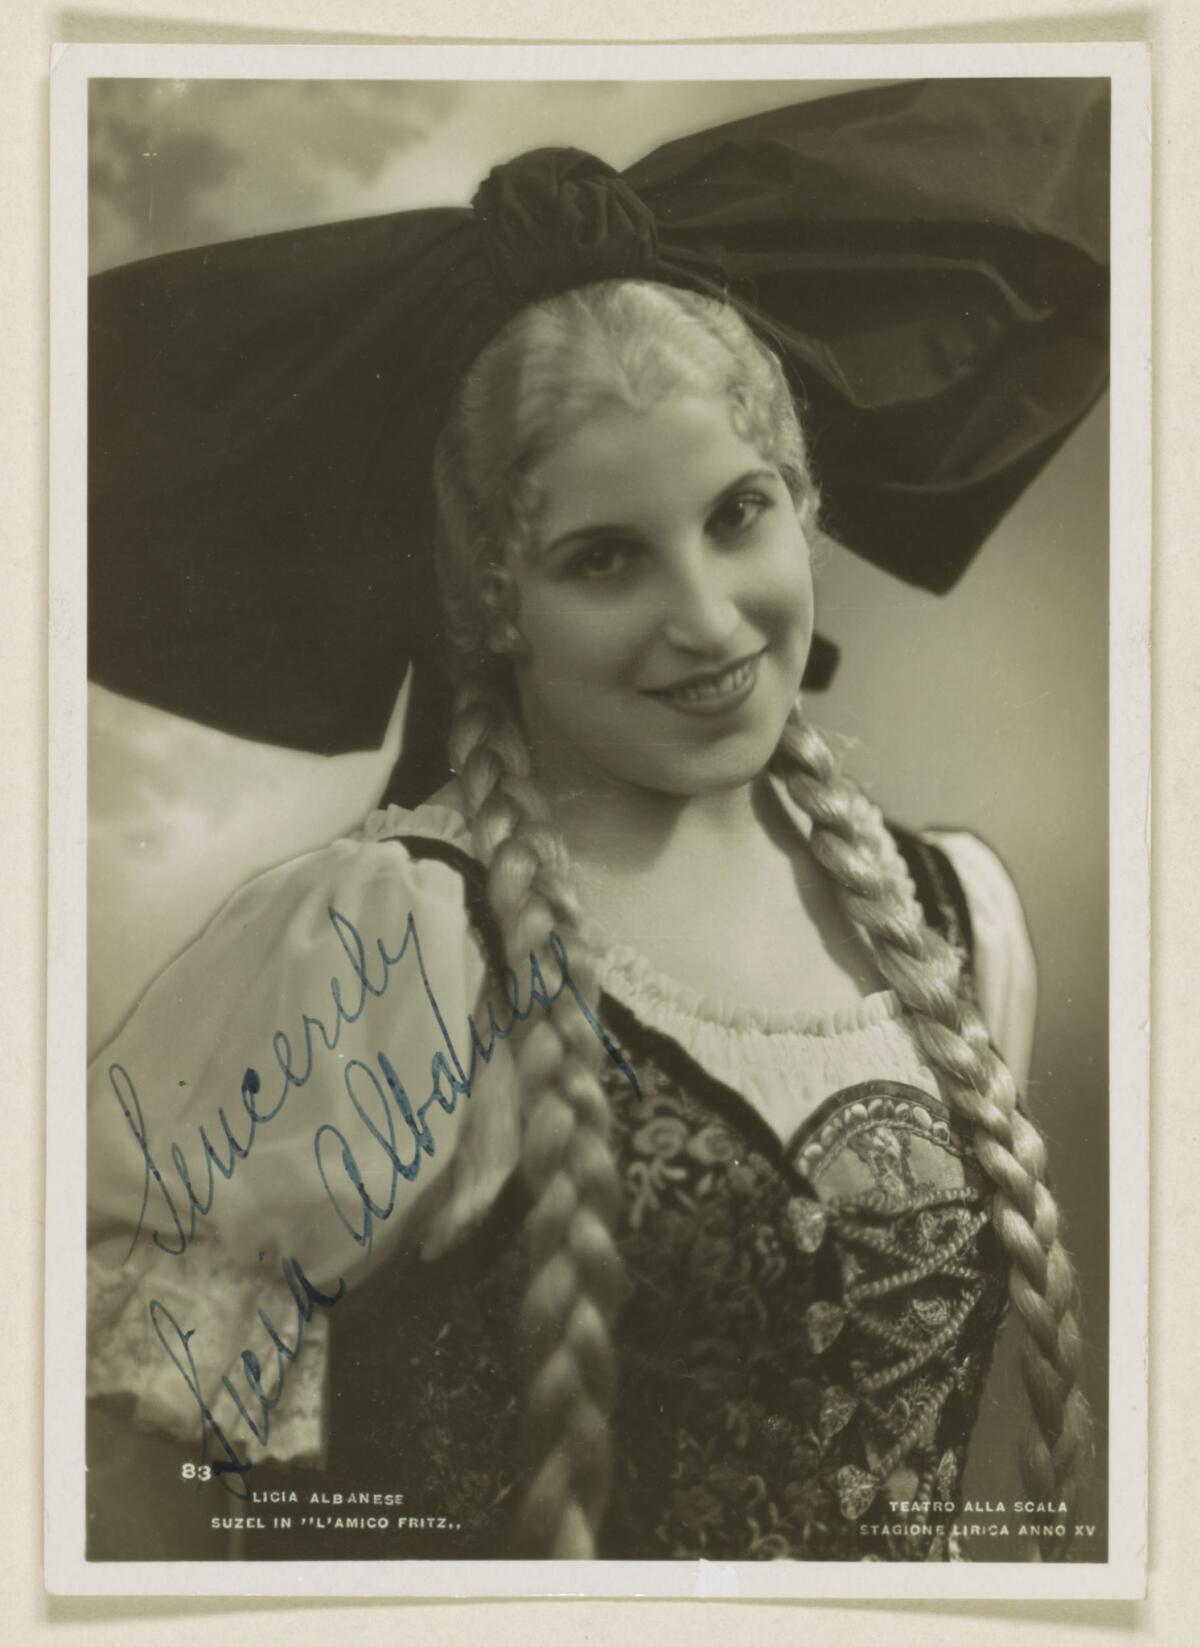 Licia Albanese as Suzel in "L'Amico Fritz," gelatin silver print, 1936. (M. Camuzzi / Charles Jahant Collection / Library of Congress)